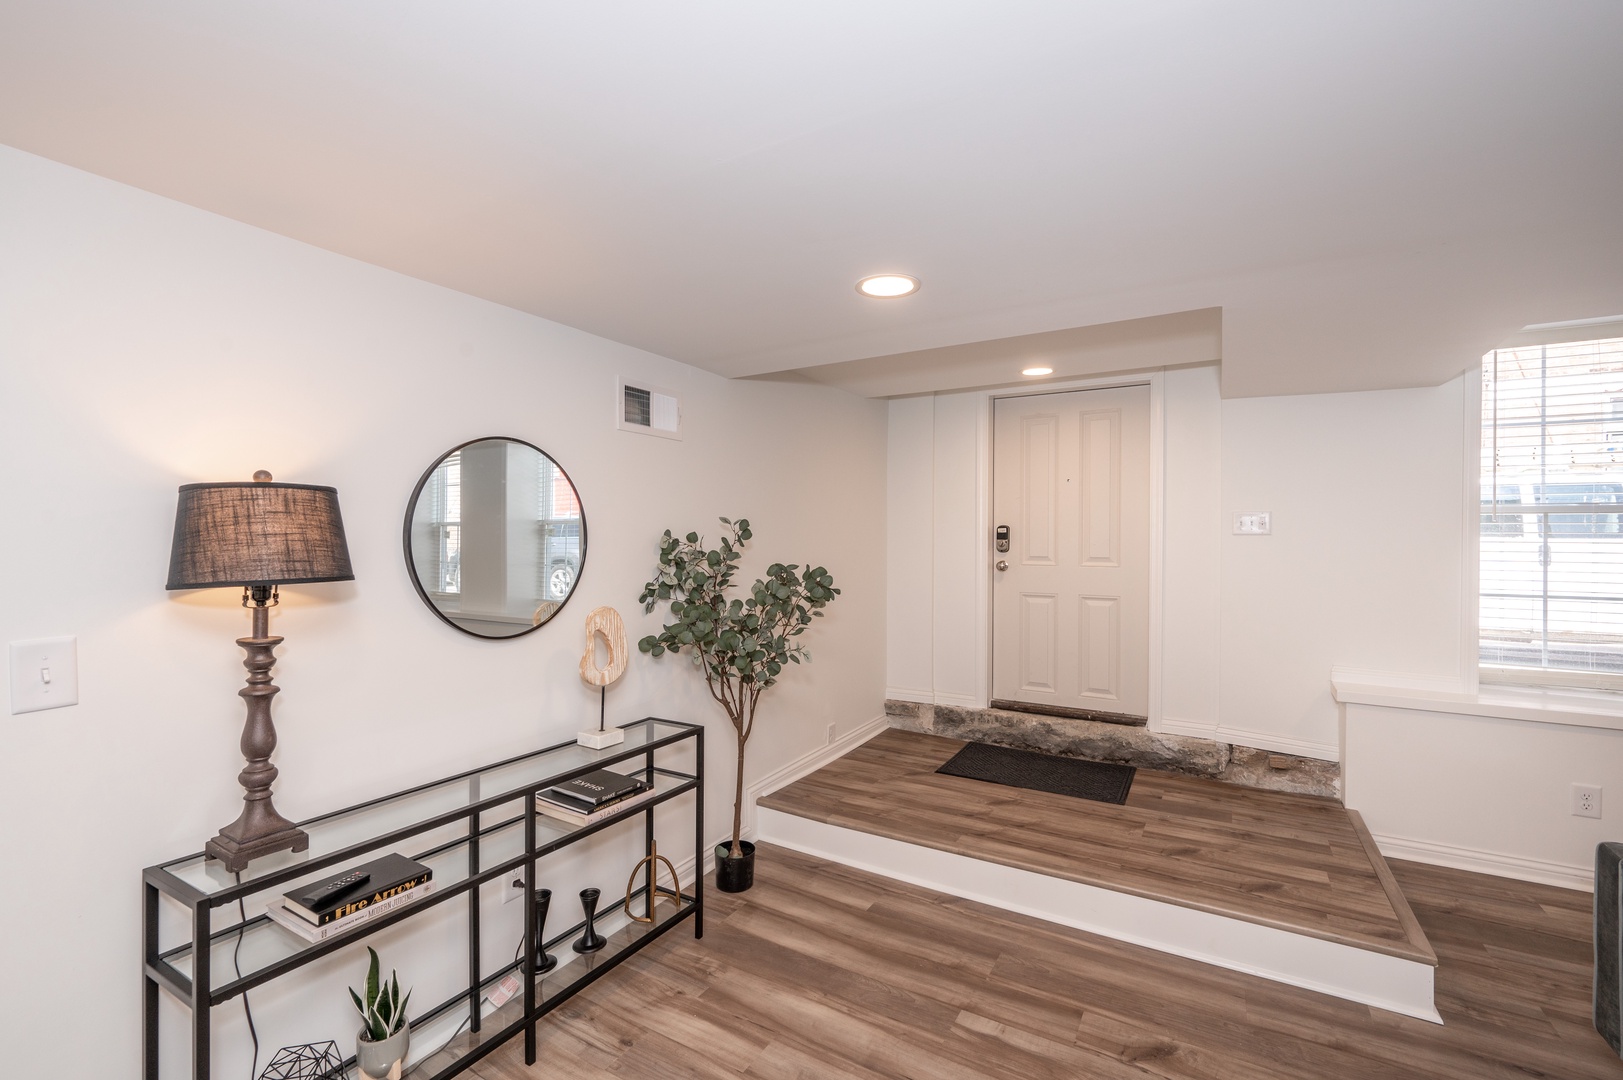 Unit 101: A comfortable open entryway will welcome you home